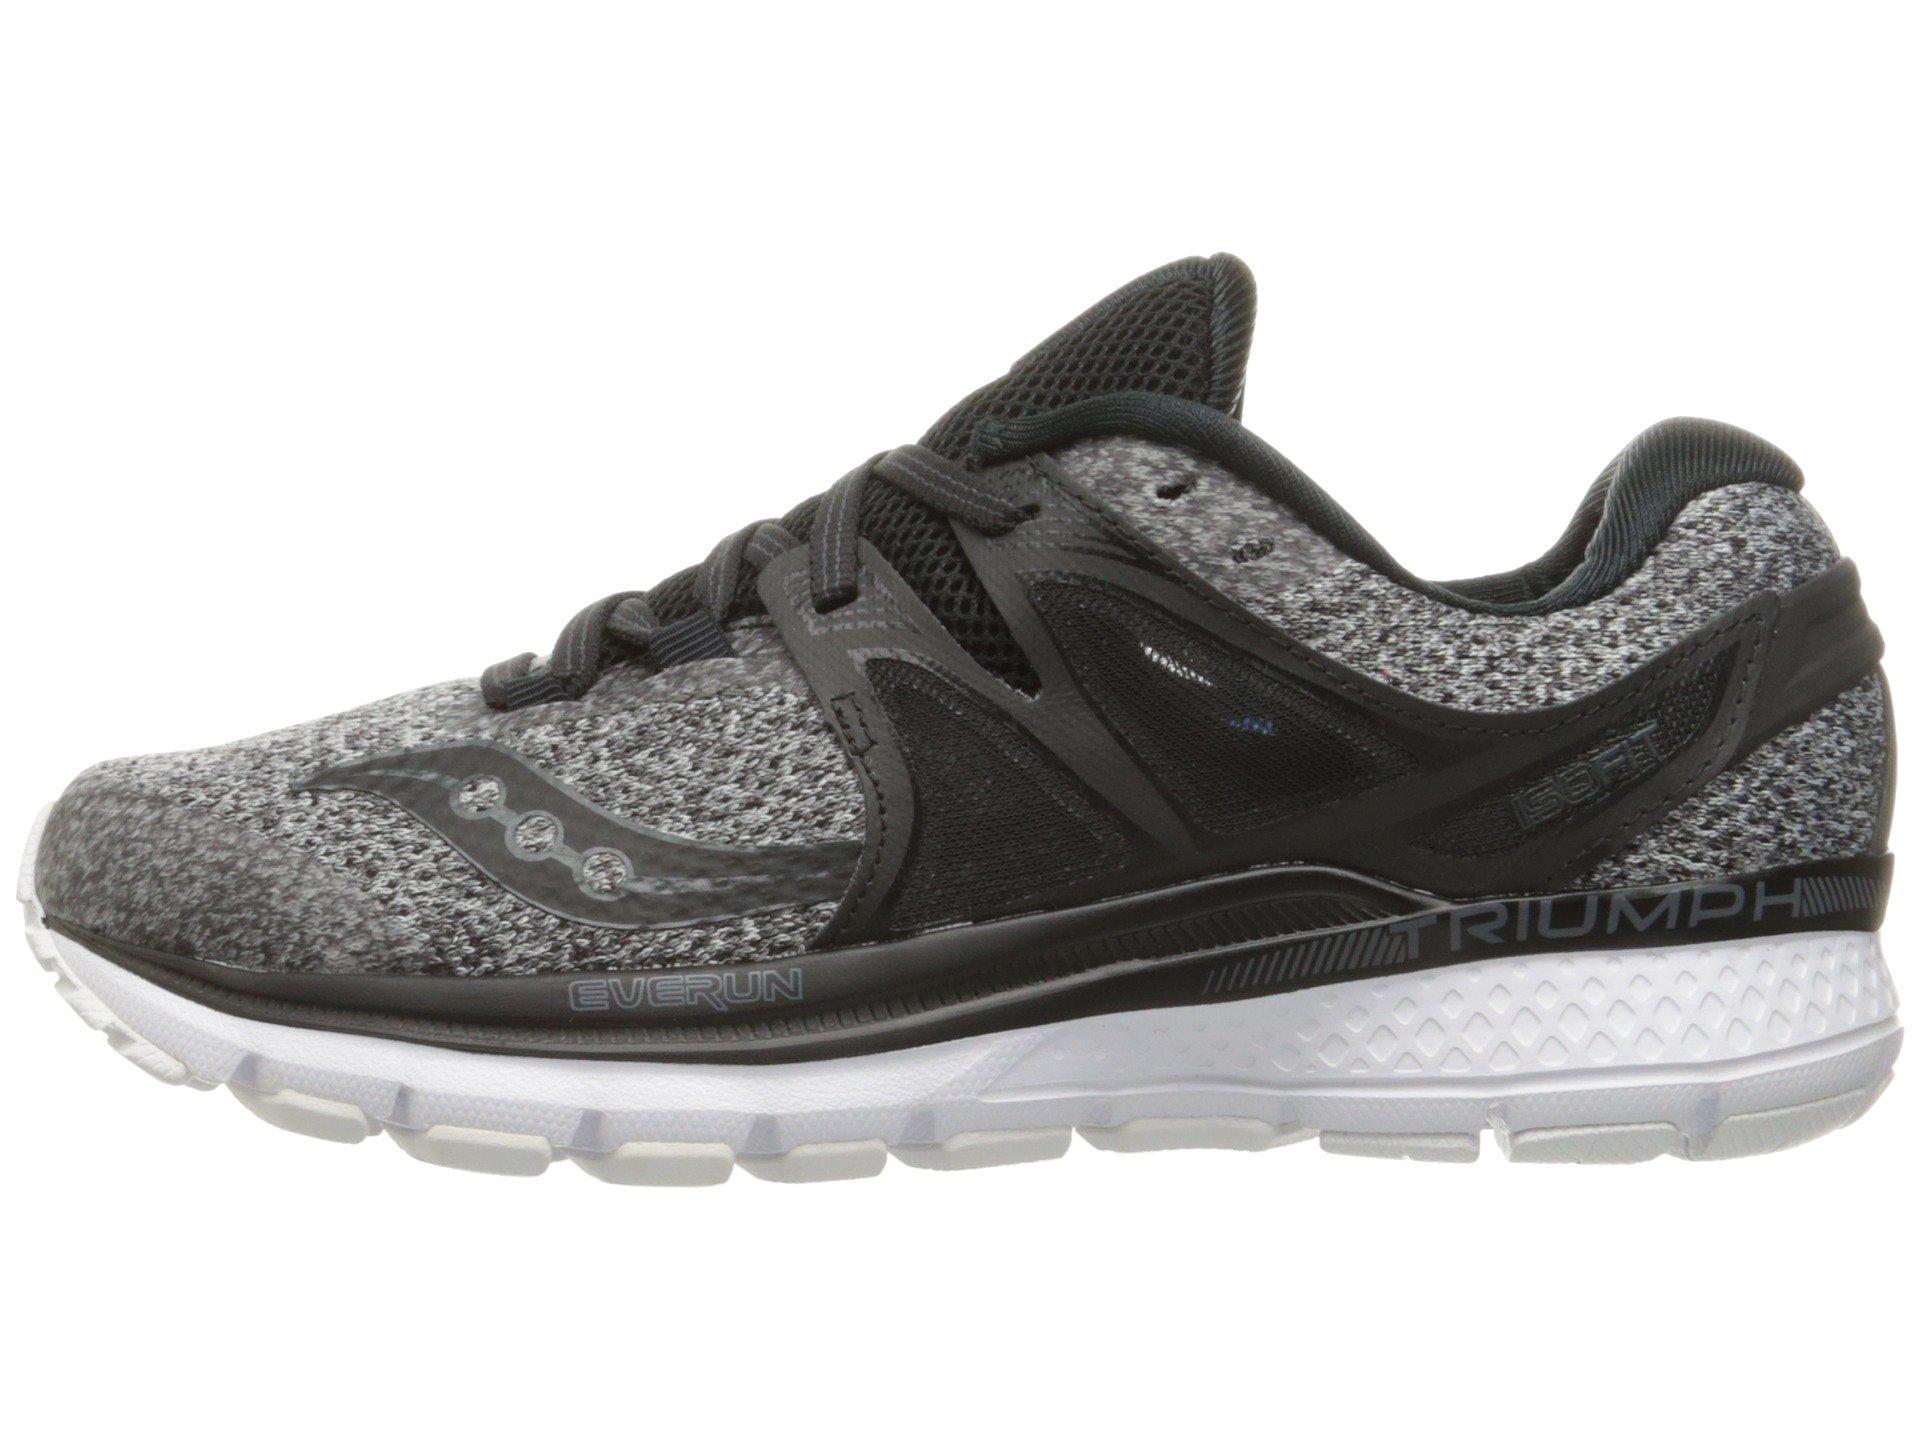 Saucony Synthetic Triumph Iso 3 (marl 